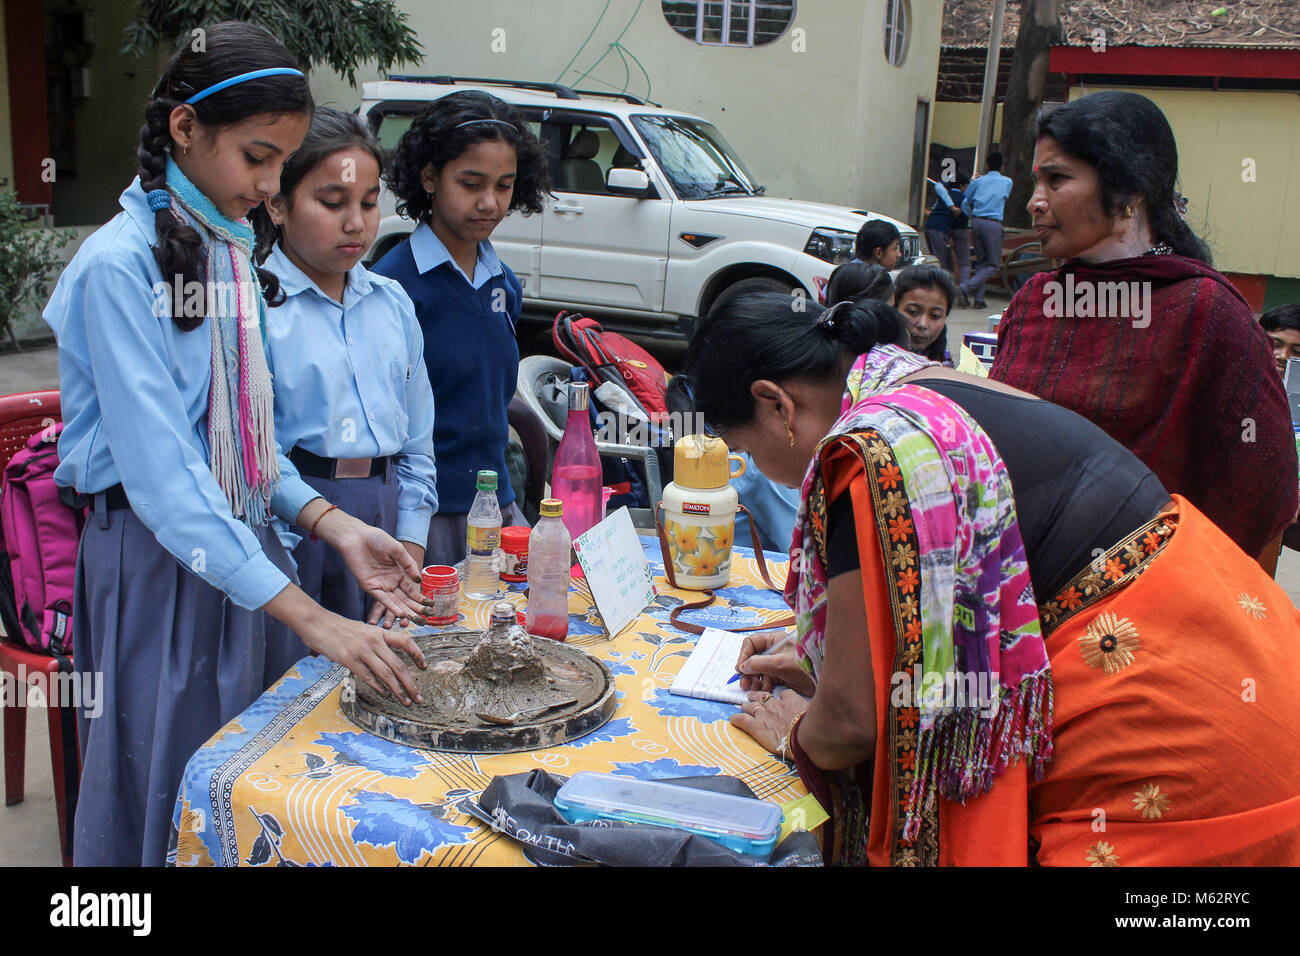 Guwahati, India. 28th Feb, 2018. Students showcased their invention model in a science exhibition during National Science Day at Assam Jatiya Vidyalaya. National Science Day is celebrated every year in India on February 28th, a date which marks the discovery of the Raman Effect by Indian physicist Sir Chandrasekhara Venkata Raman. Parents and other members of the school community who attended the fair were impressed with the presentations made by our young scientists. Credit: David Talukdar/Pacific Press/Alamy Live News Stock Photo